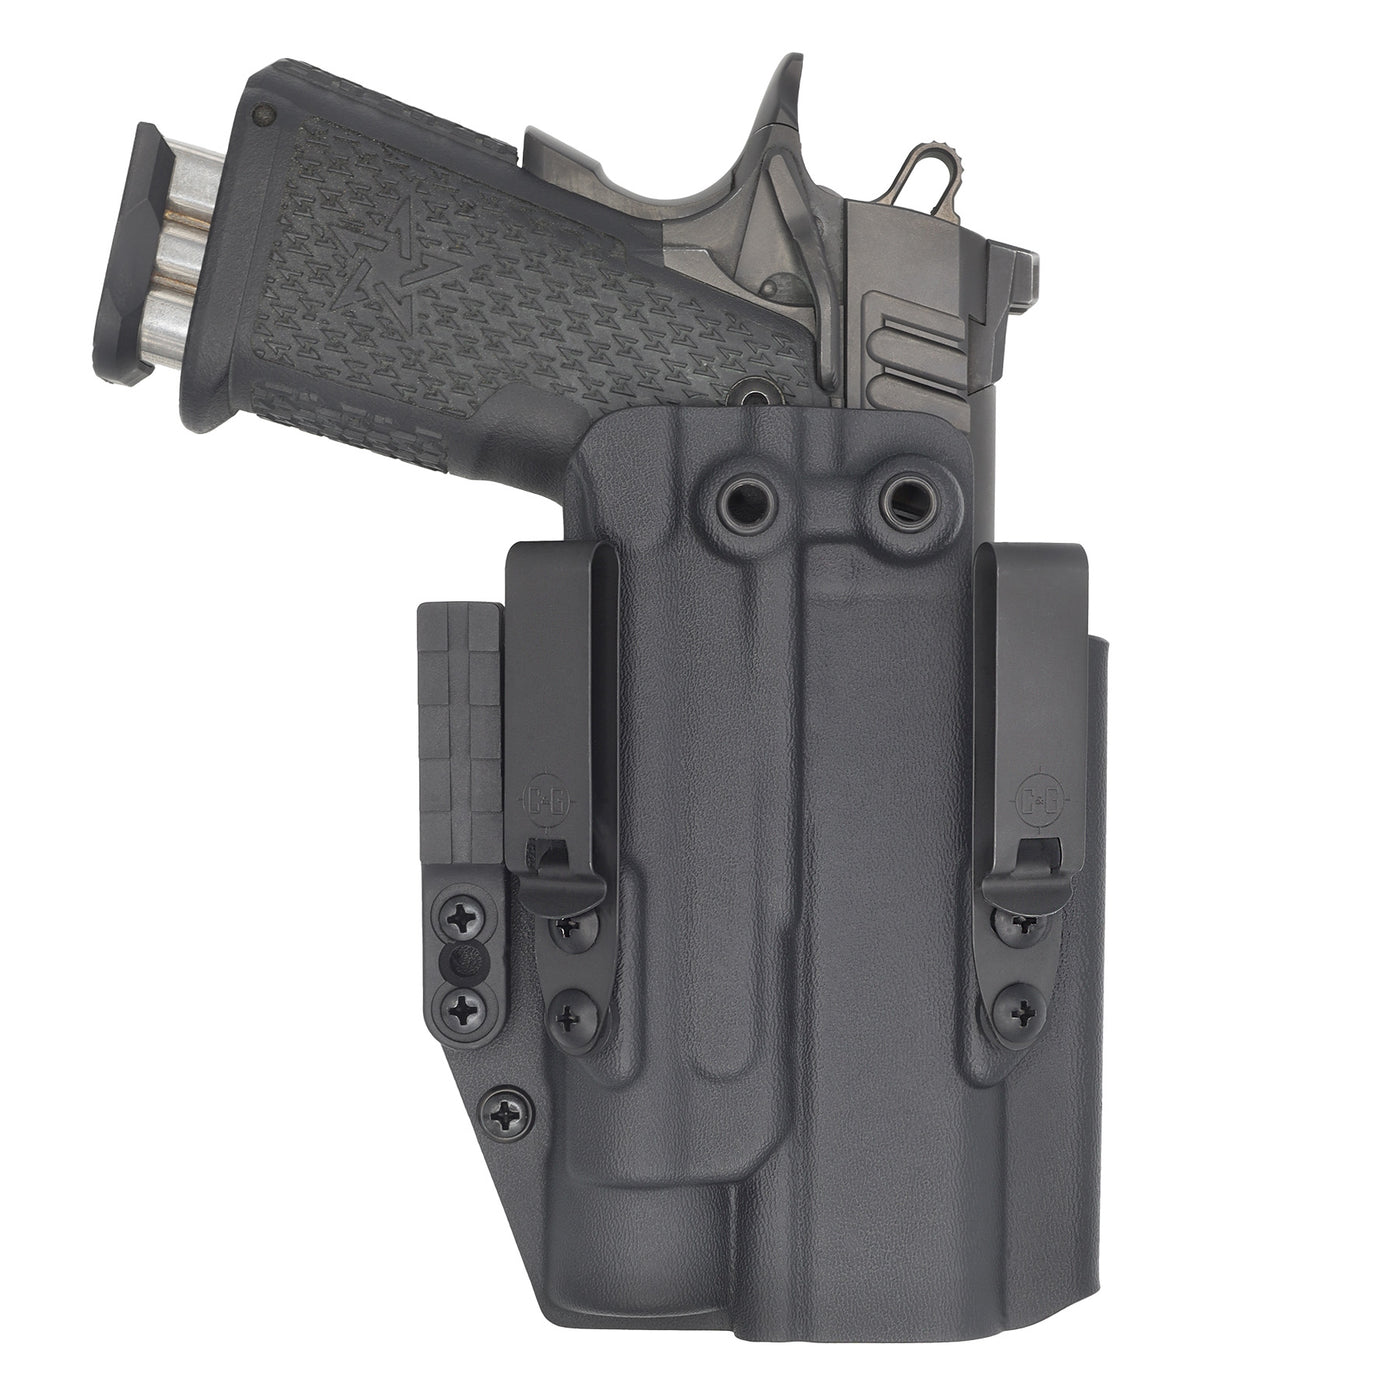 C&G Holsters custom ALPHA UPGRADE IWB Tactical staccato TLR1 in holstered position